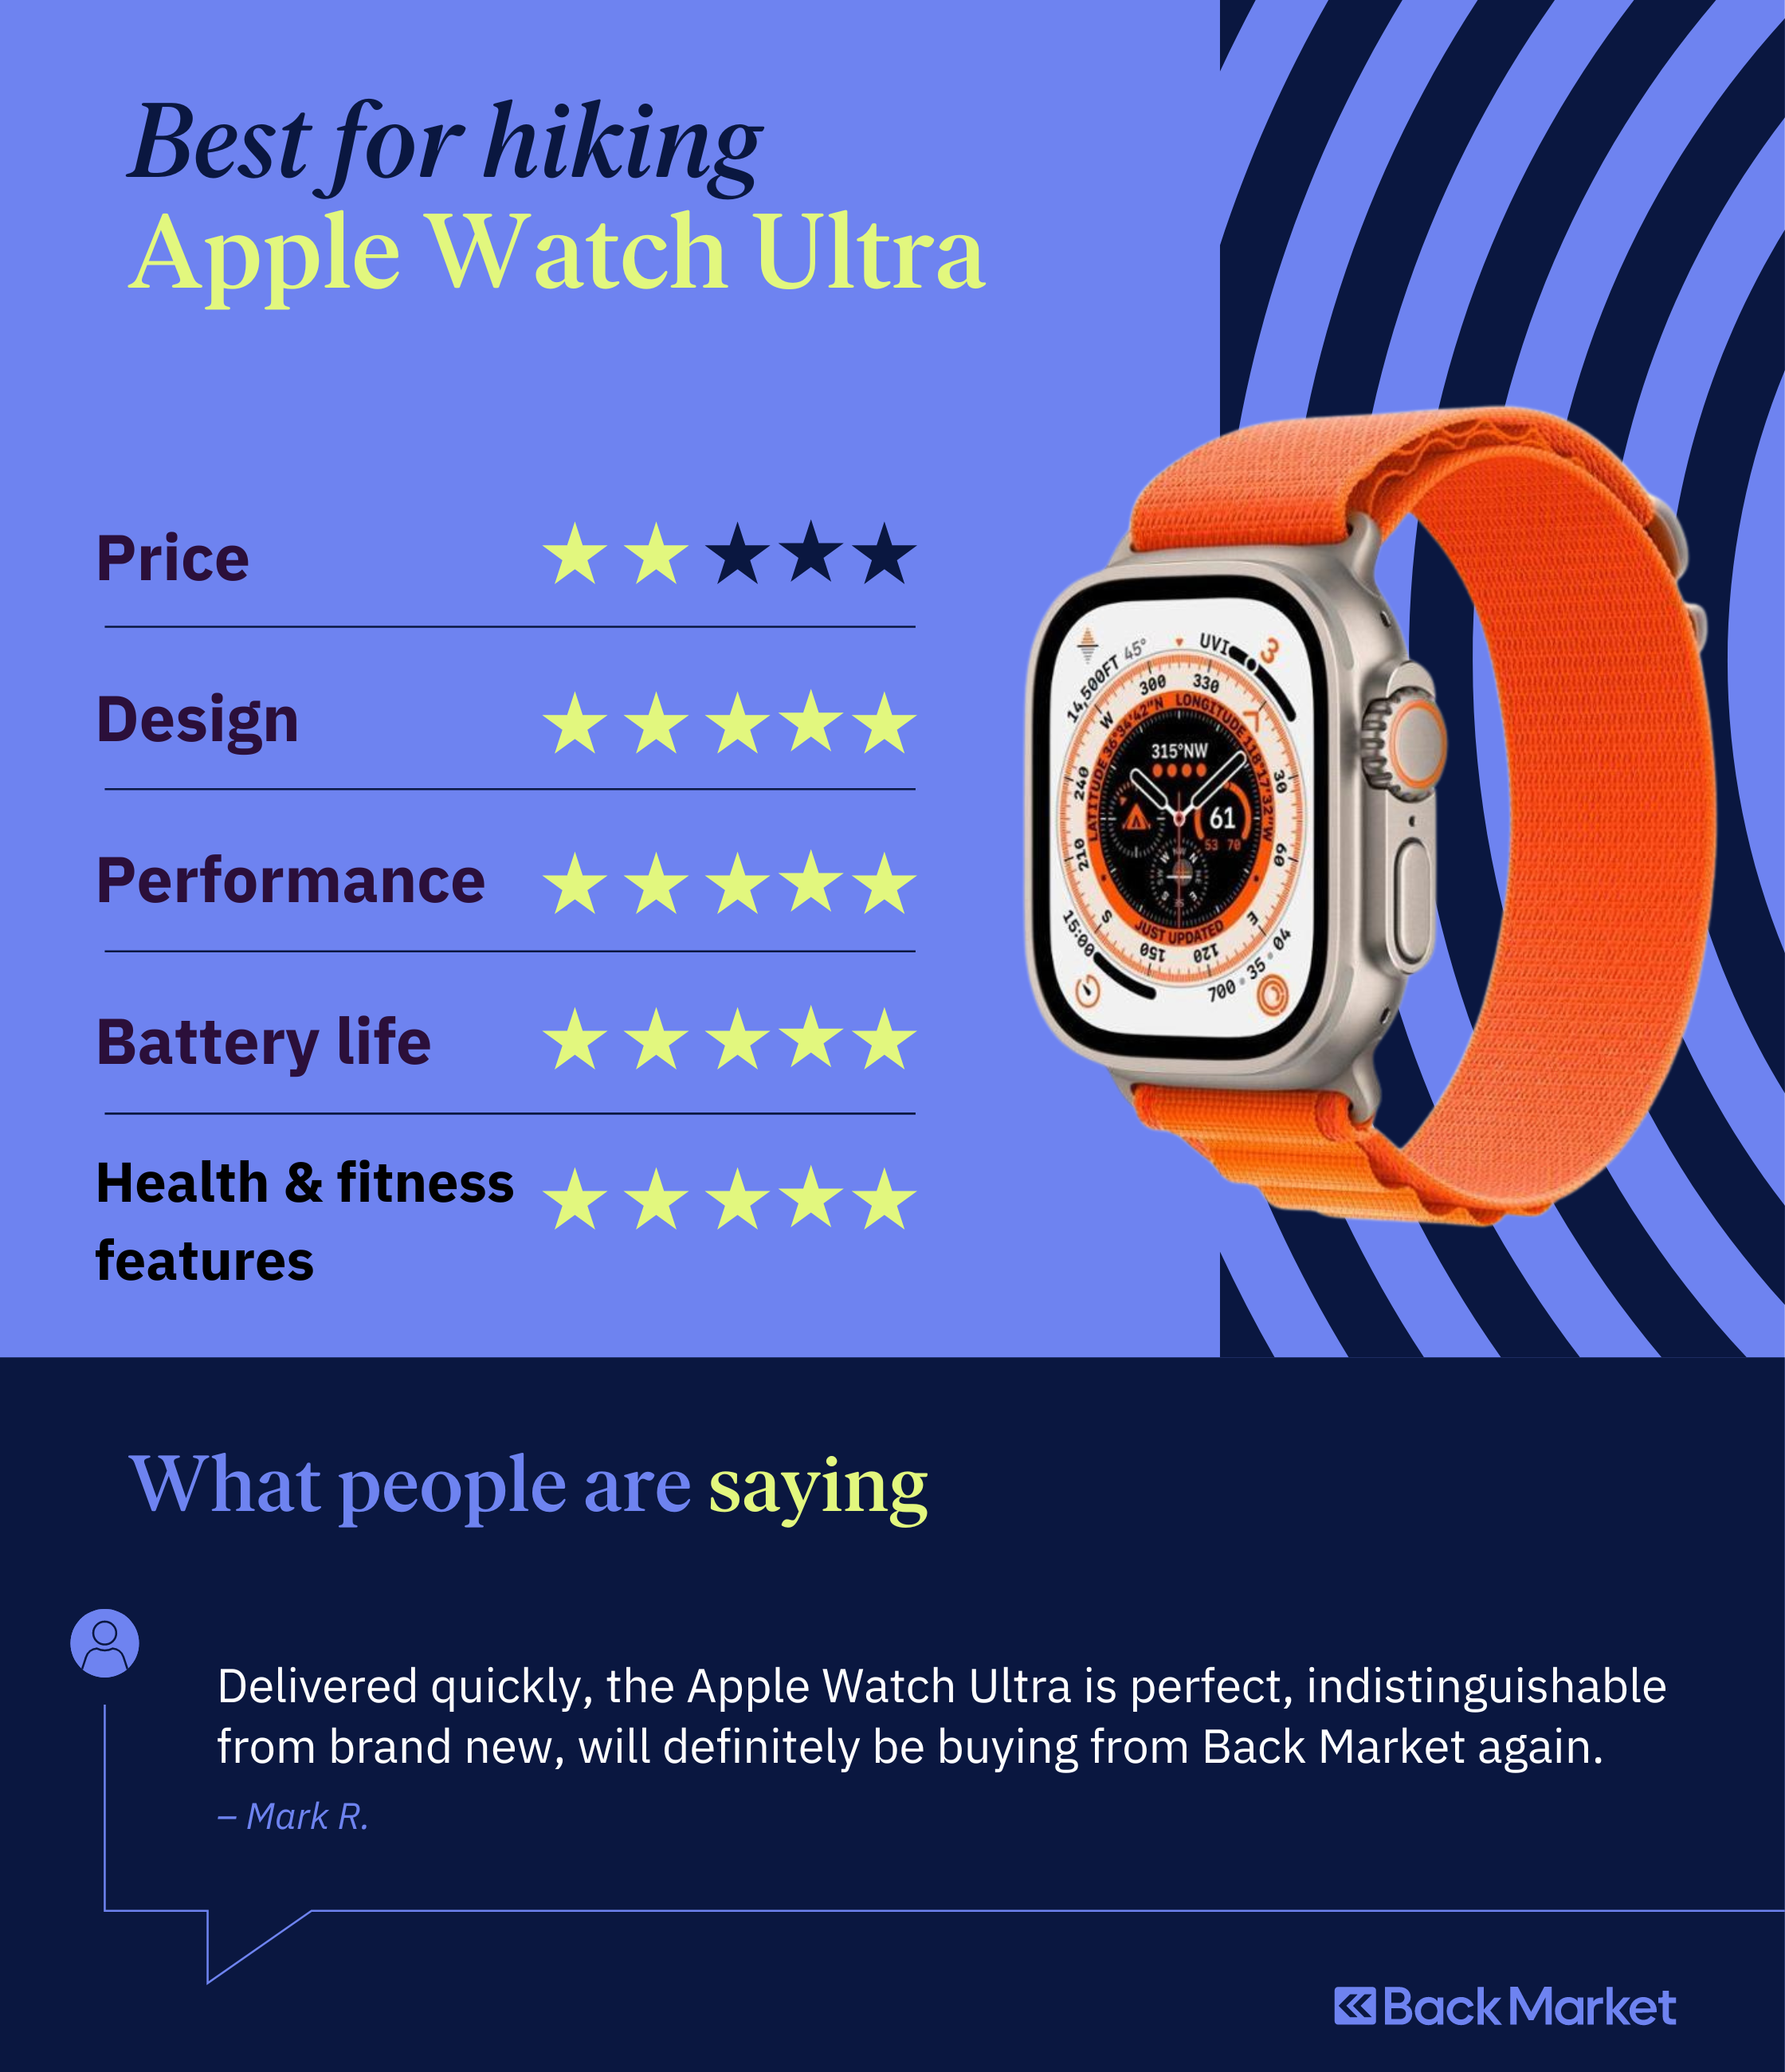 best-for-hiking-apple-watch-ultra-image